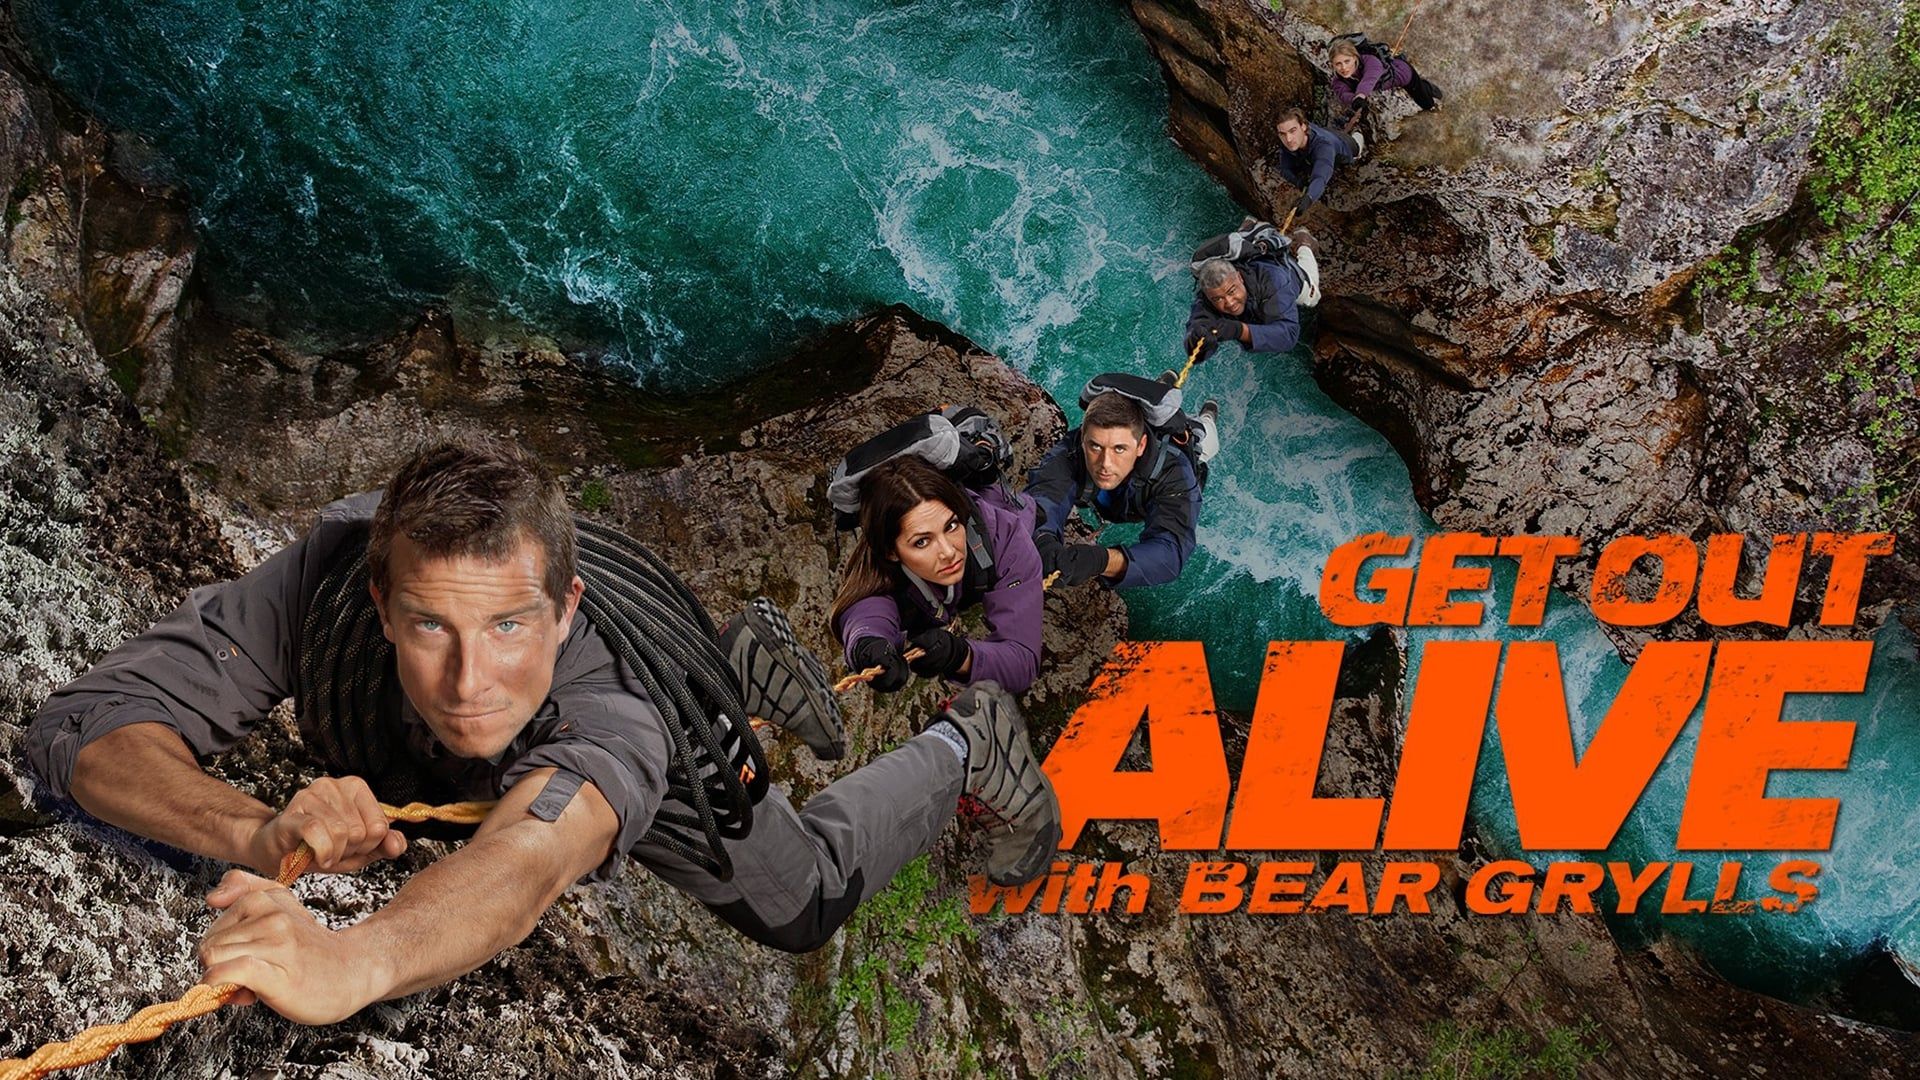 Watch Running Wild with Bear Grylls: The Challenge TV Show - Streaming  Online